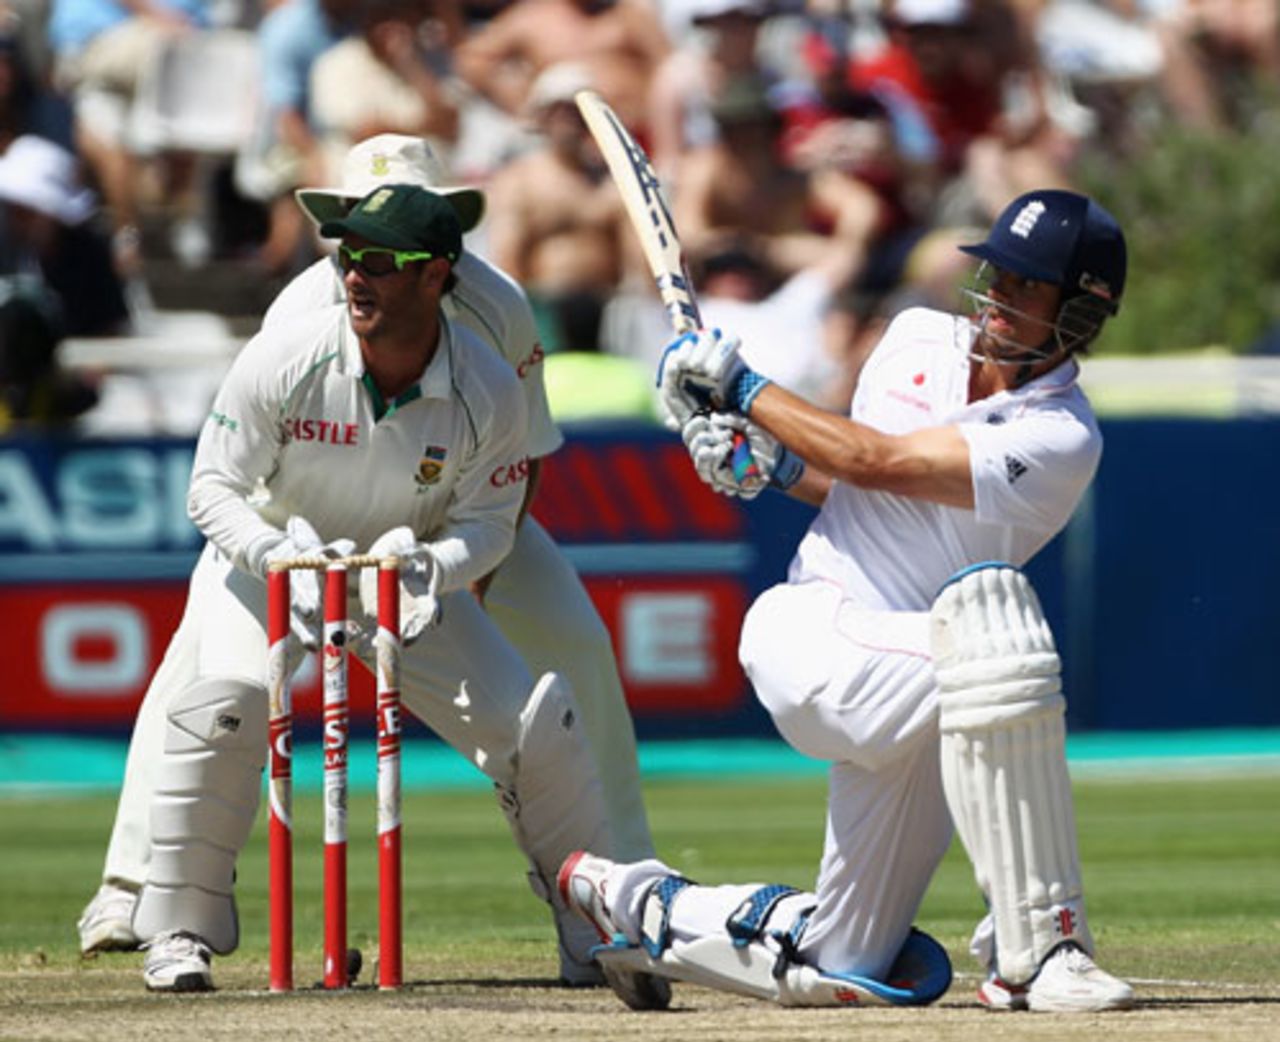 Alastair Cook sweeps powerfully as Mark Boucher looks on, South Africa v England, 3rd Test, Cape Town, January 6, 2010 